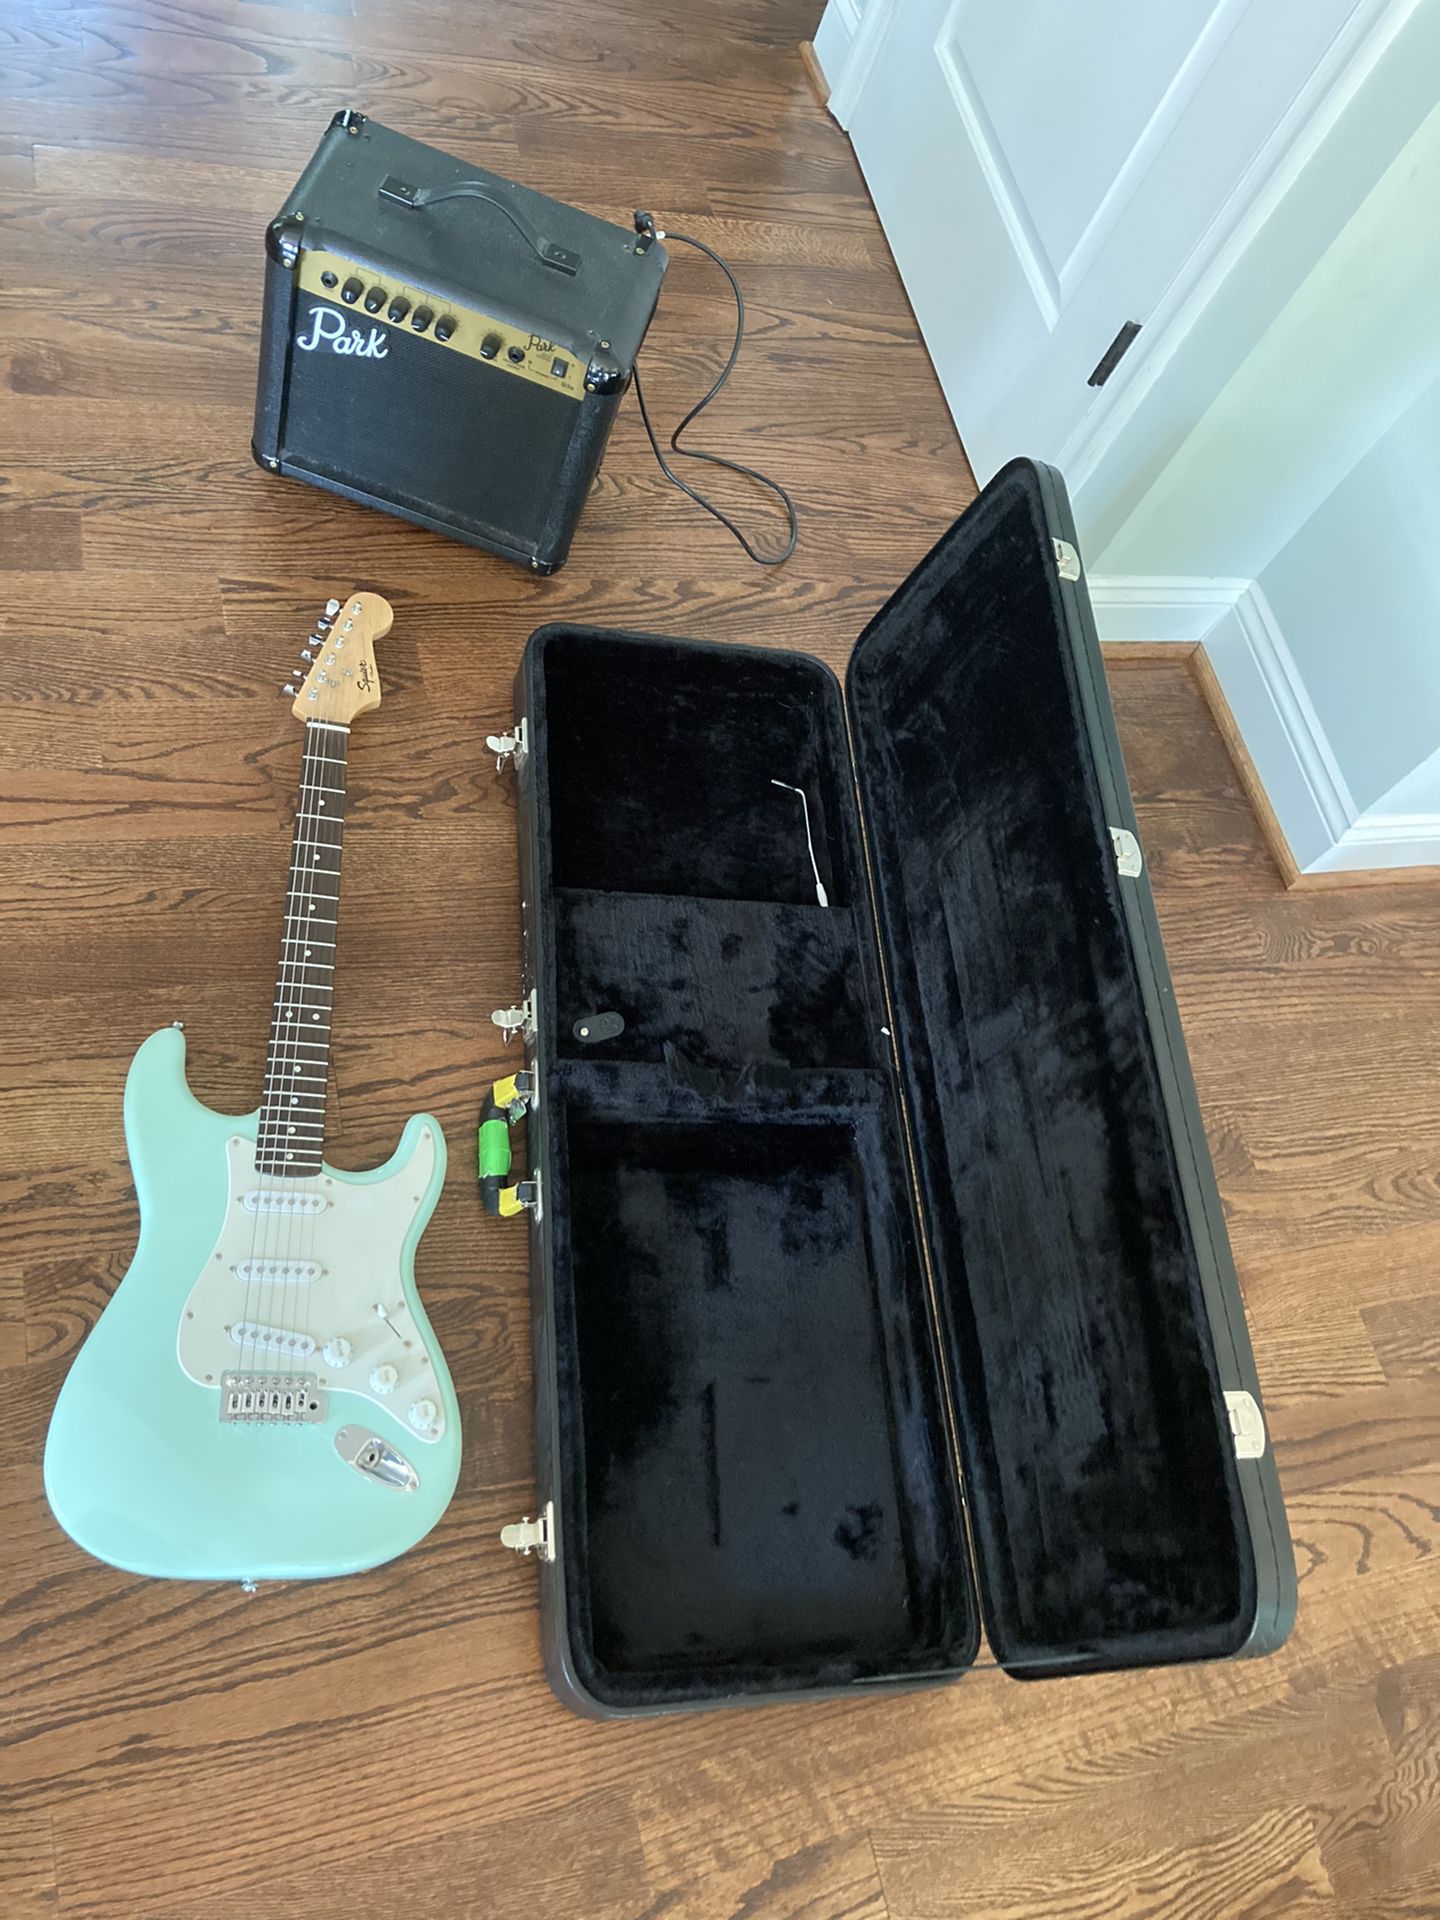 Fender Squier electric guitar with case and Park amp